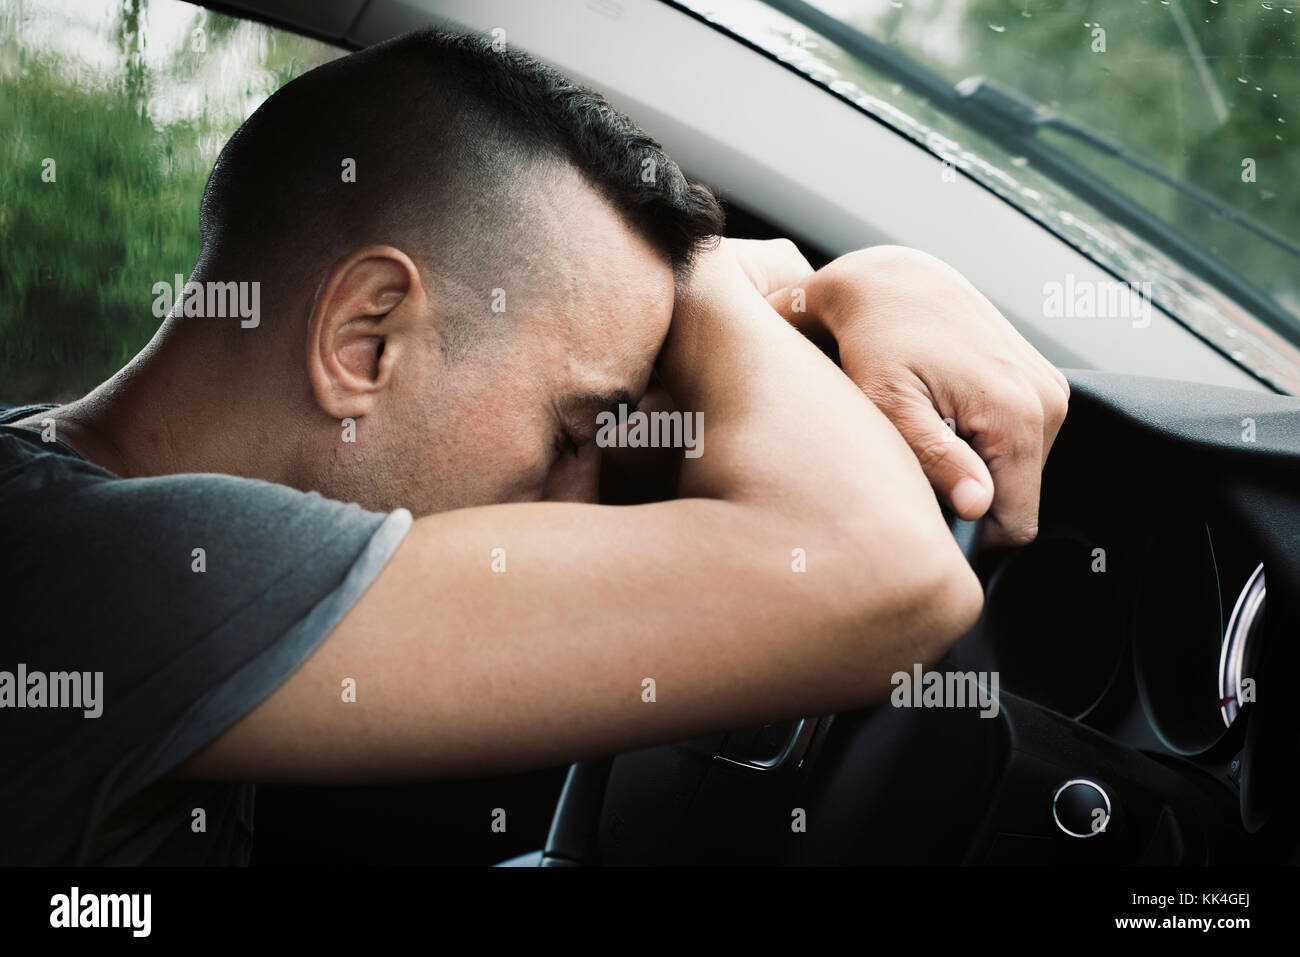 closeup of a young caucasian man sitting at the driver seat of a car reclining his head on the steering wheel, in a rainy day Stock Photo